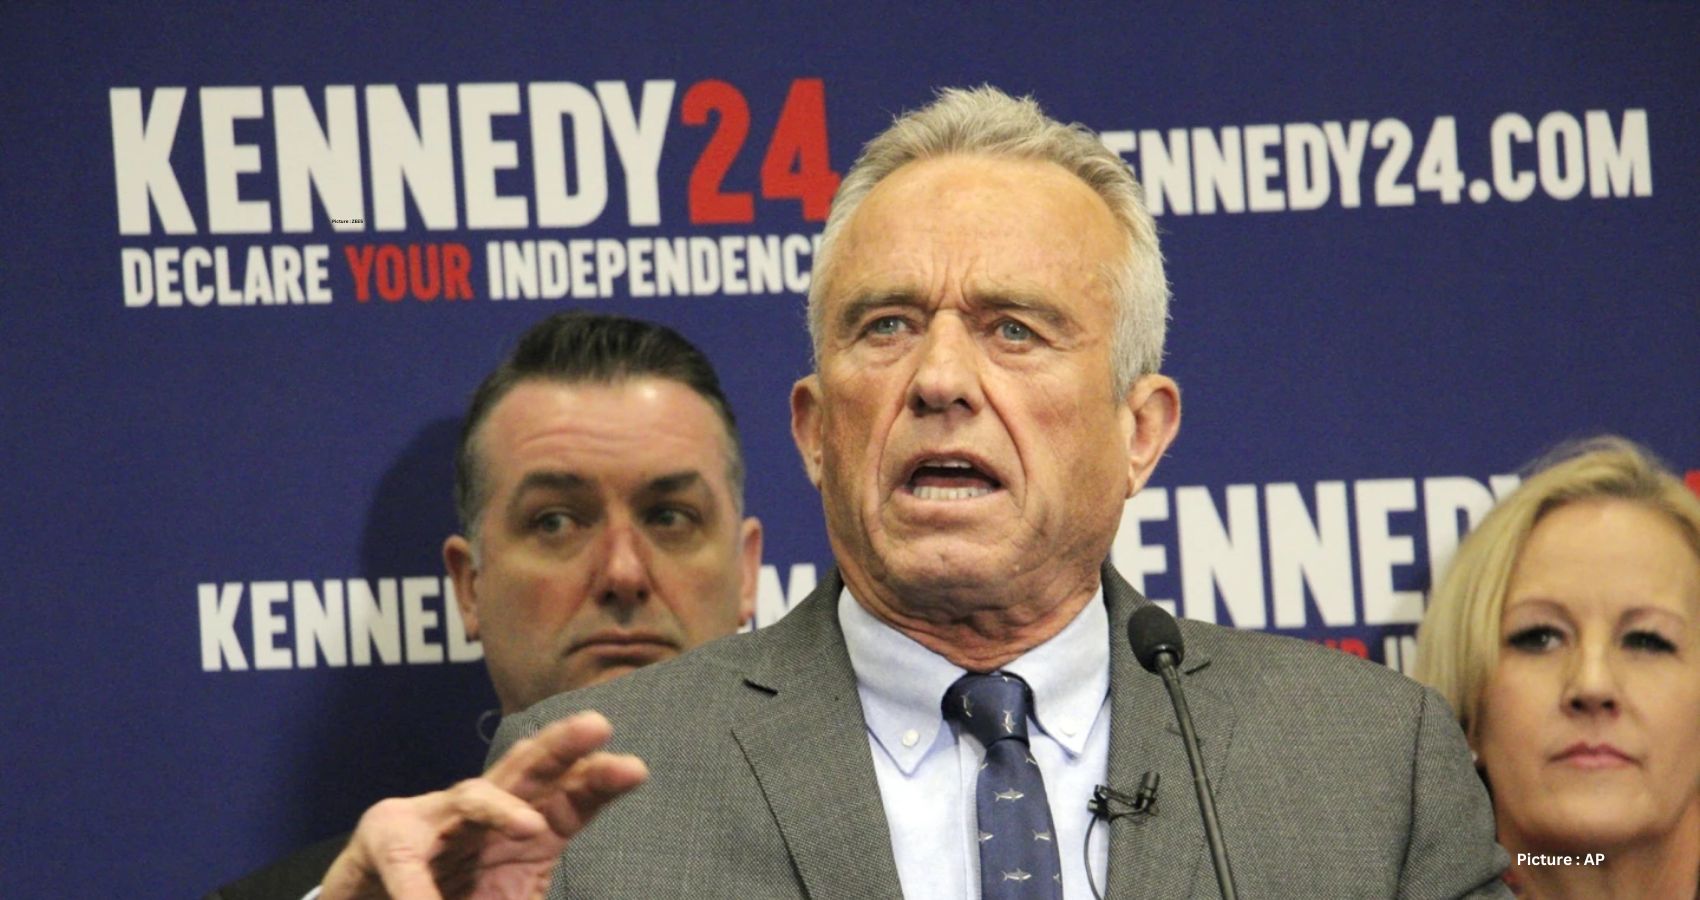 Featured & Cover Robert F Kennedy Jr Declares Presidential Candidacy in Utah Gaining First Ballot Access (1)